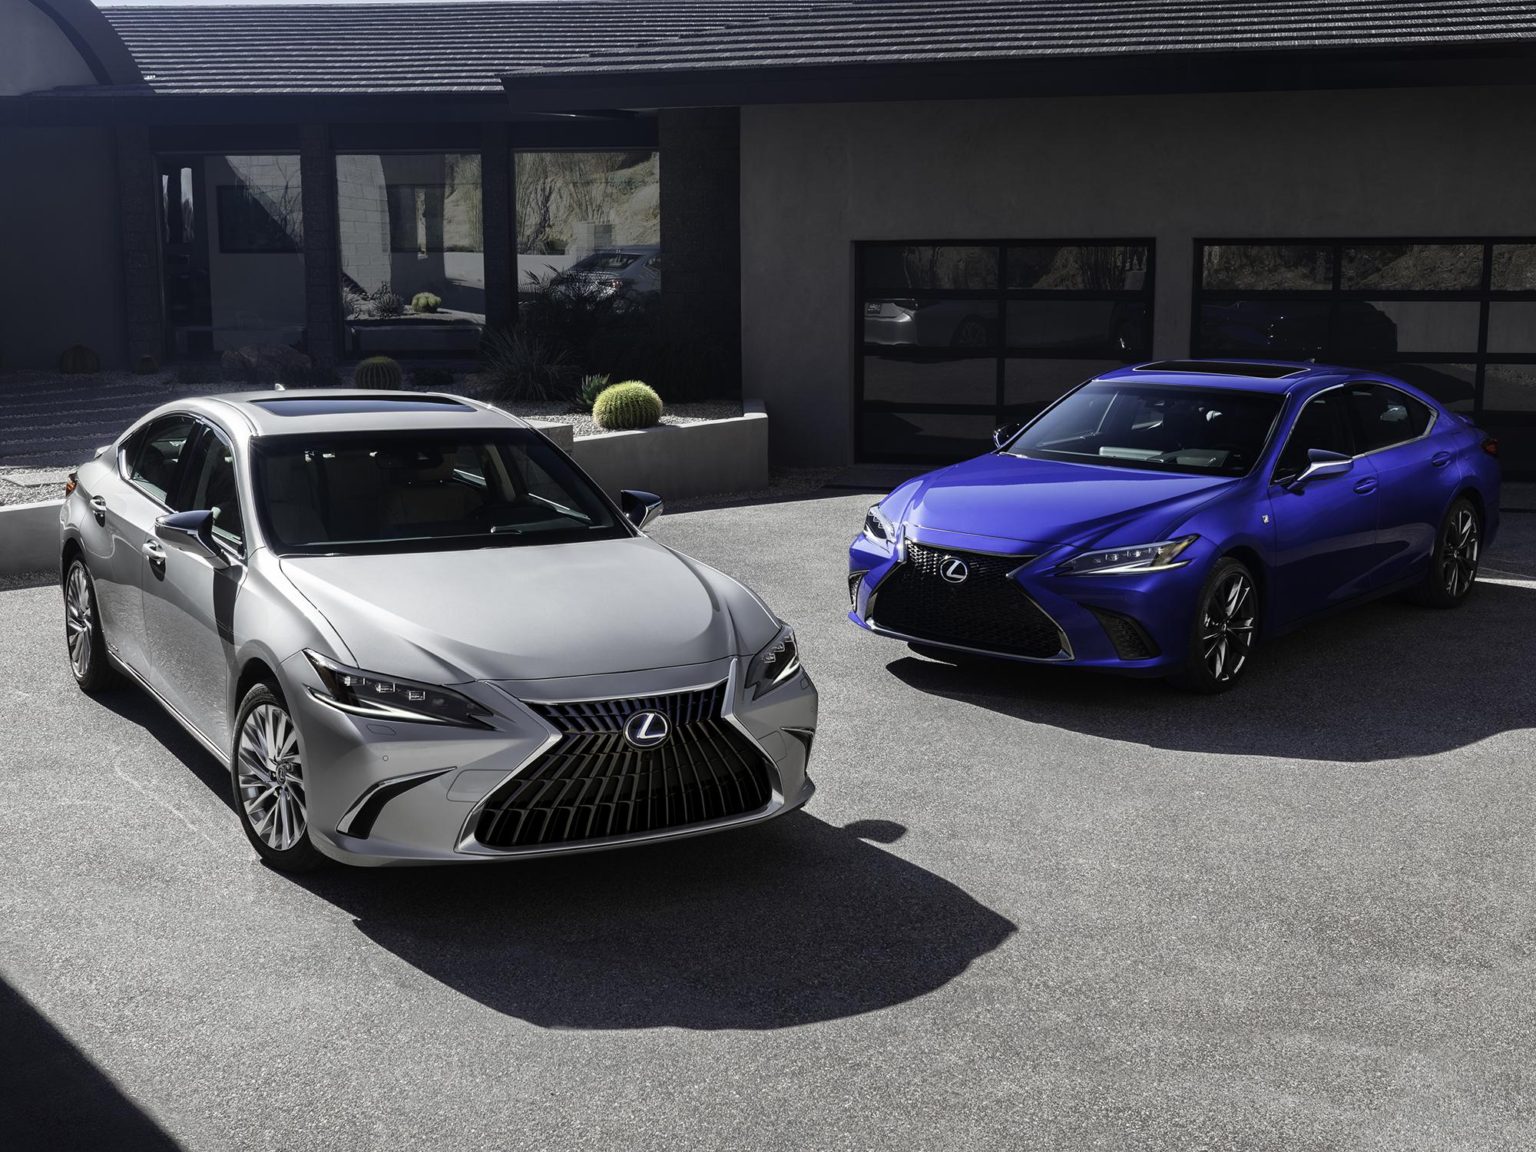 The Lexus ES has been refreshed for the 2022 model year.